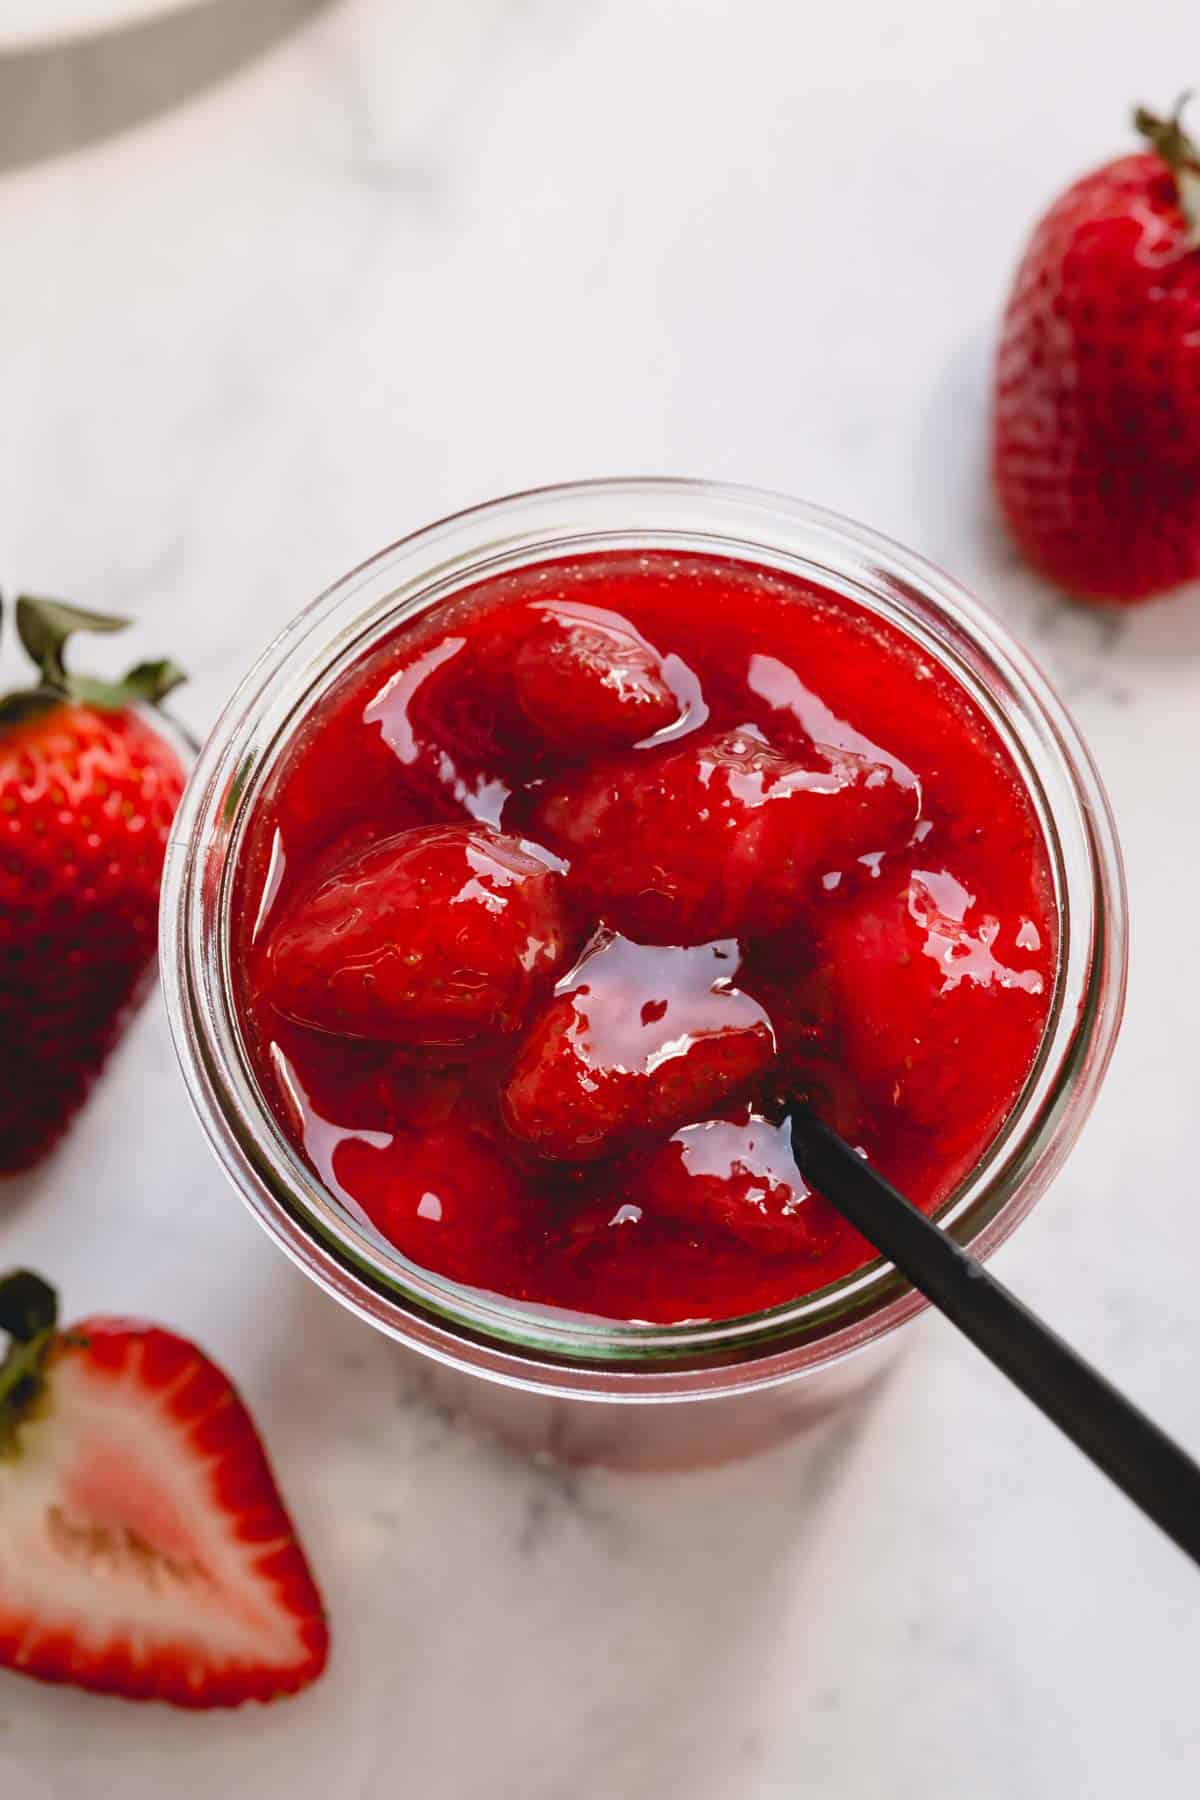 Overhead image of a spoon sticking out of a glass jar full of chunky strawberry sauce.